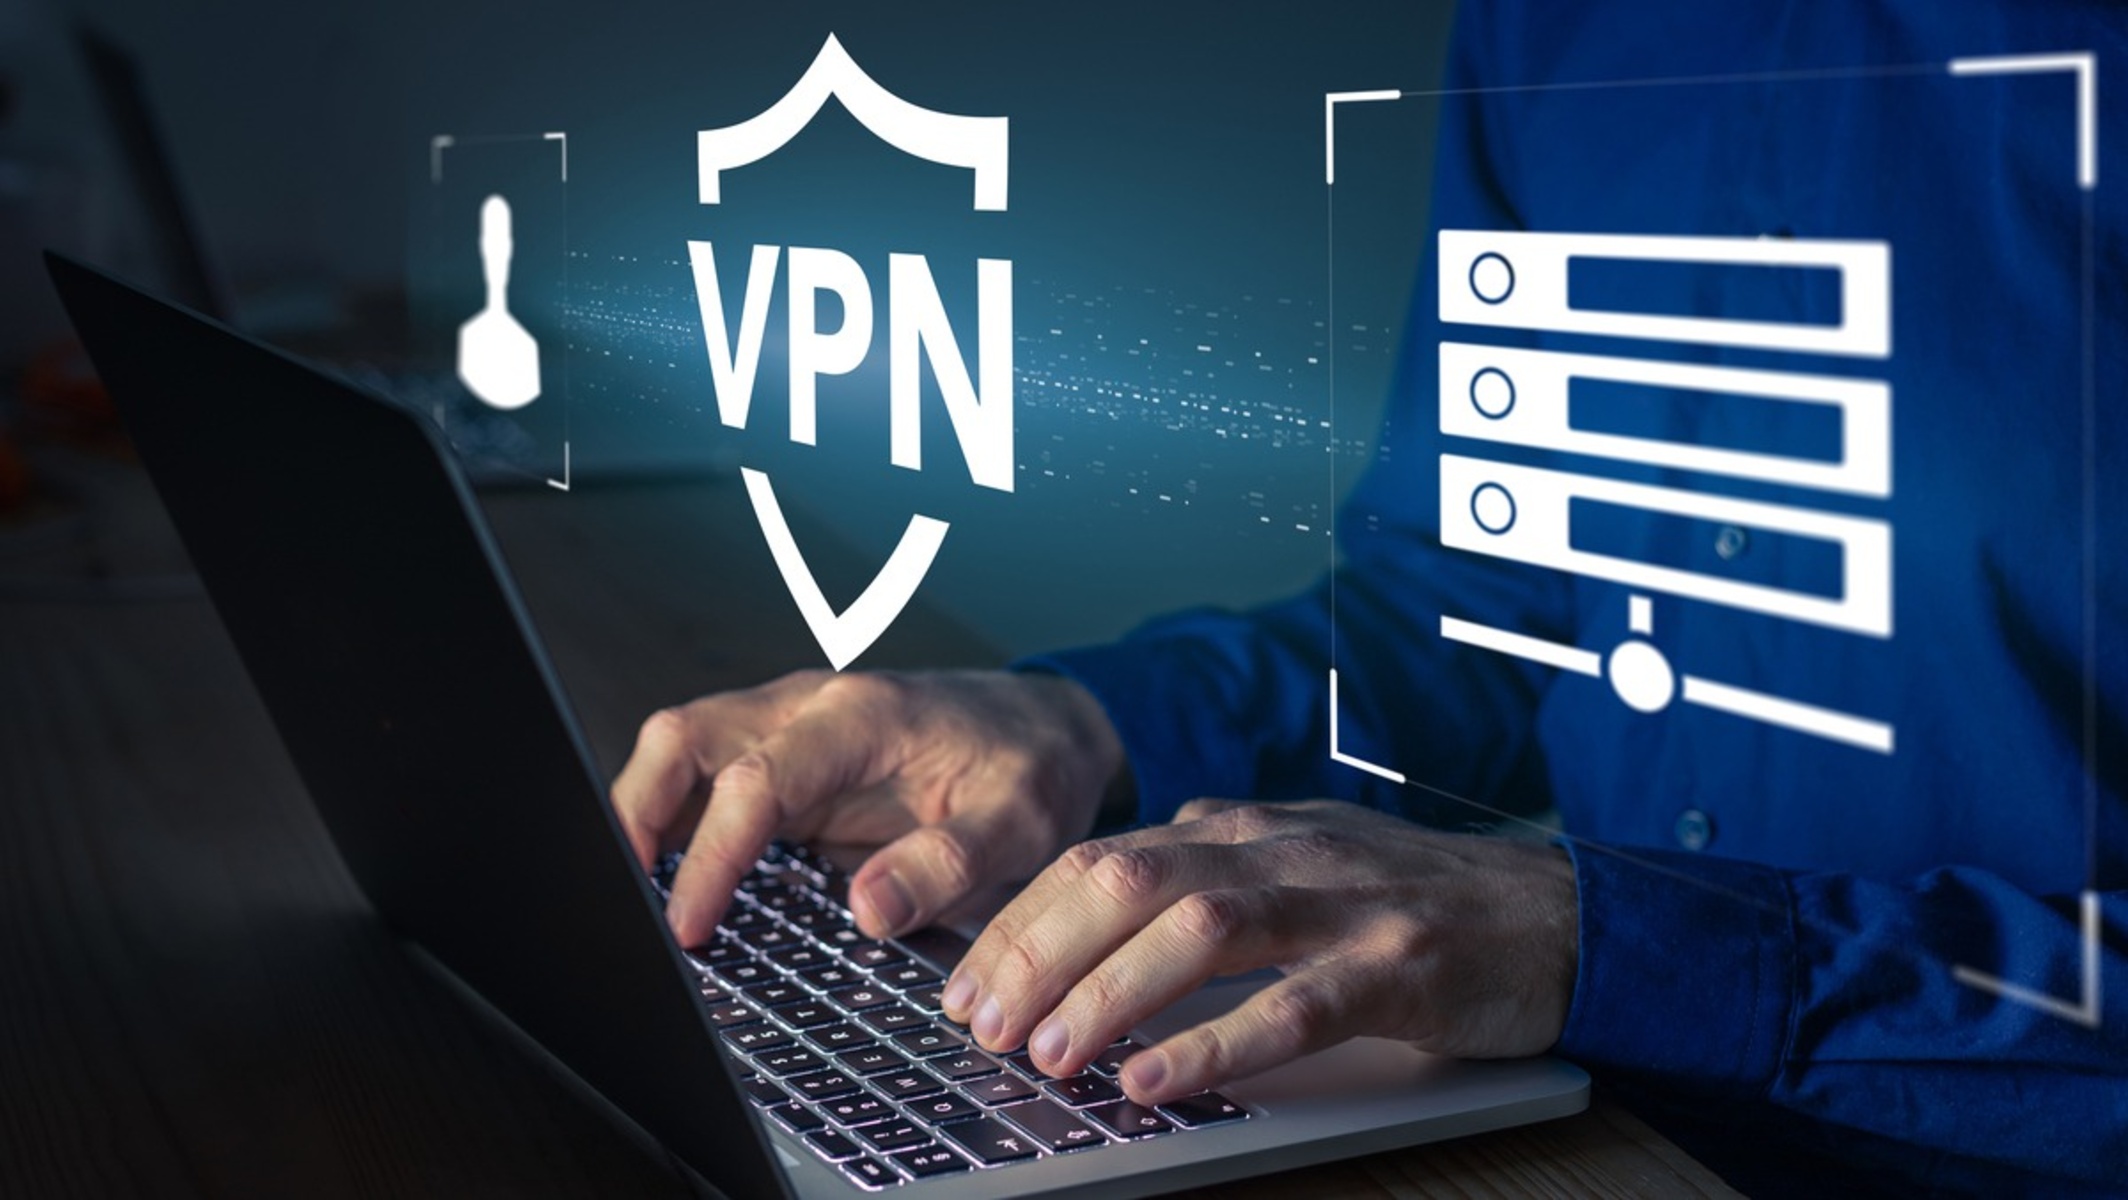 which-of-the-following-statements-is-true-regarding-a-vpn